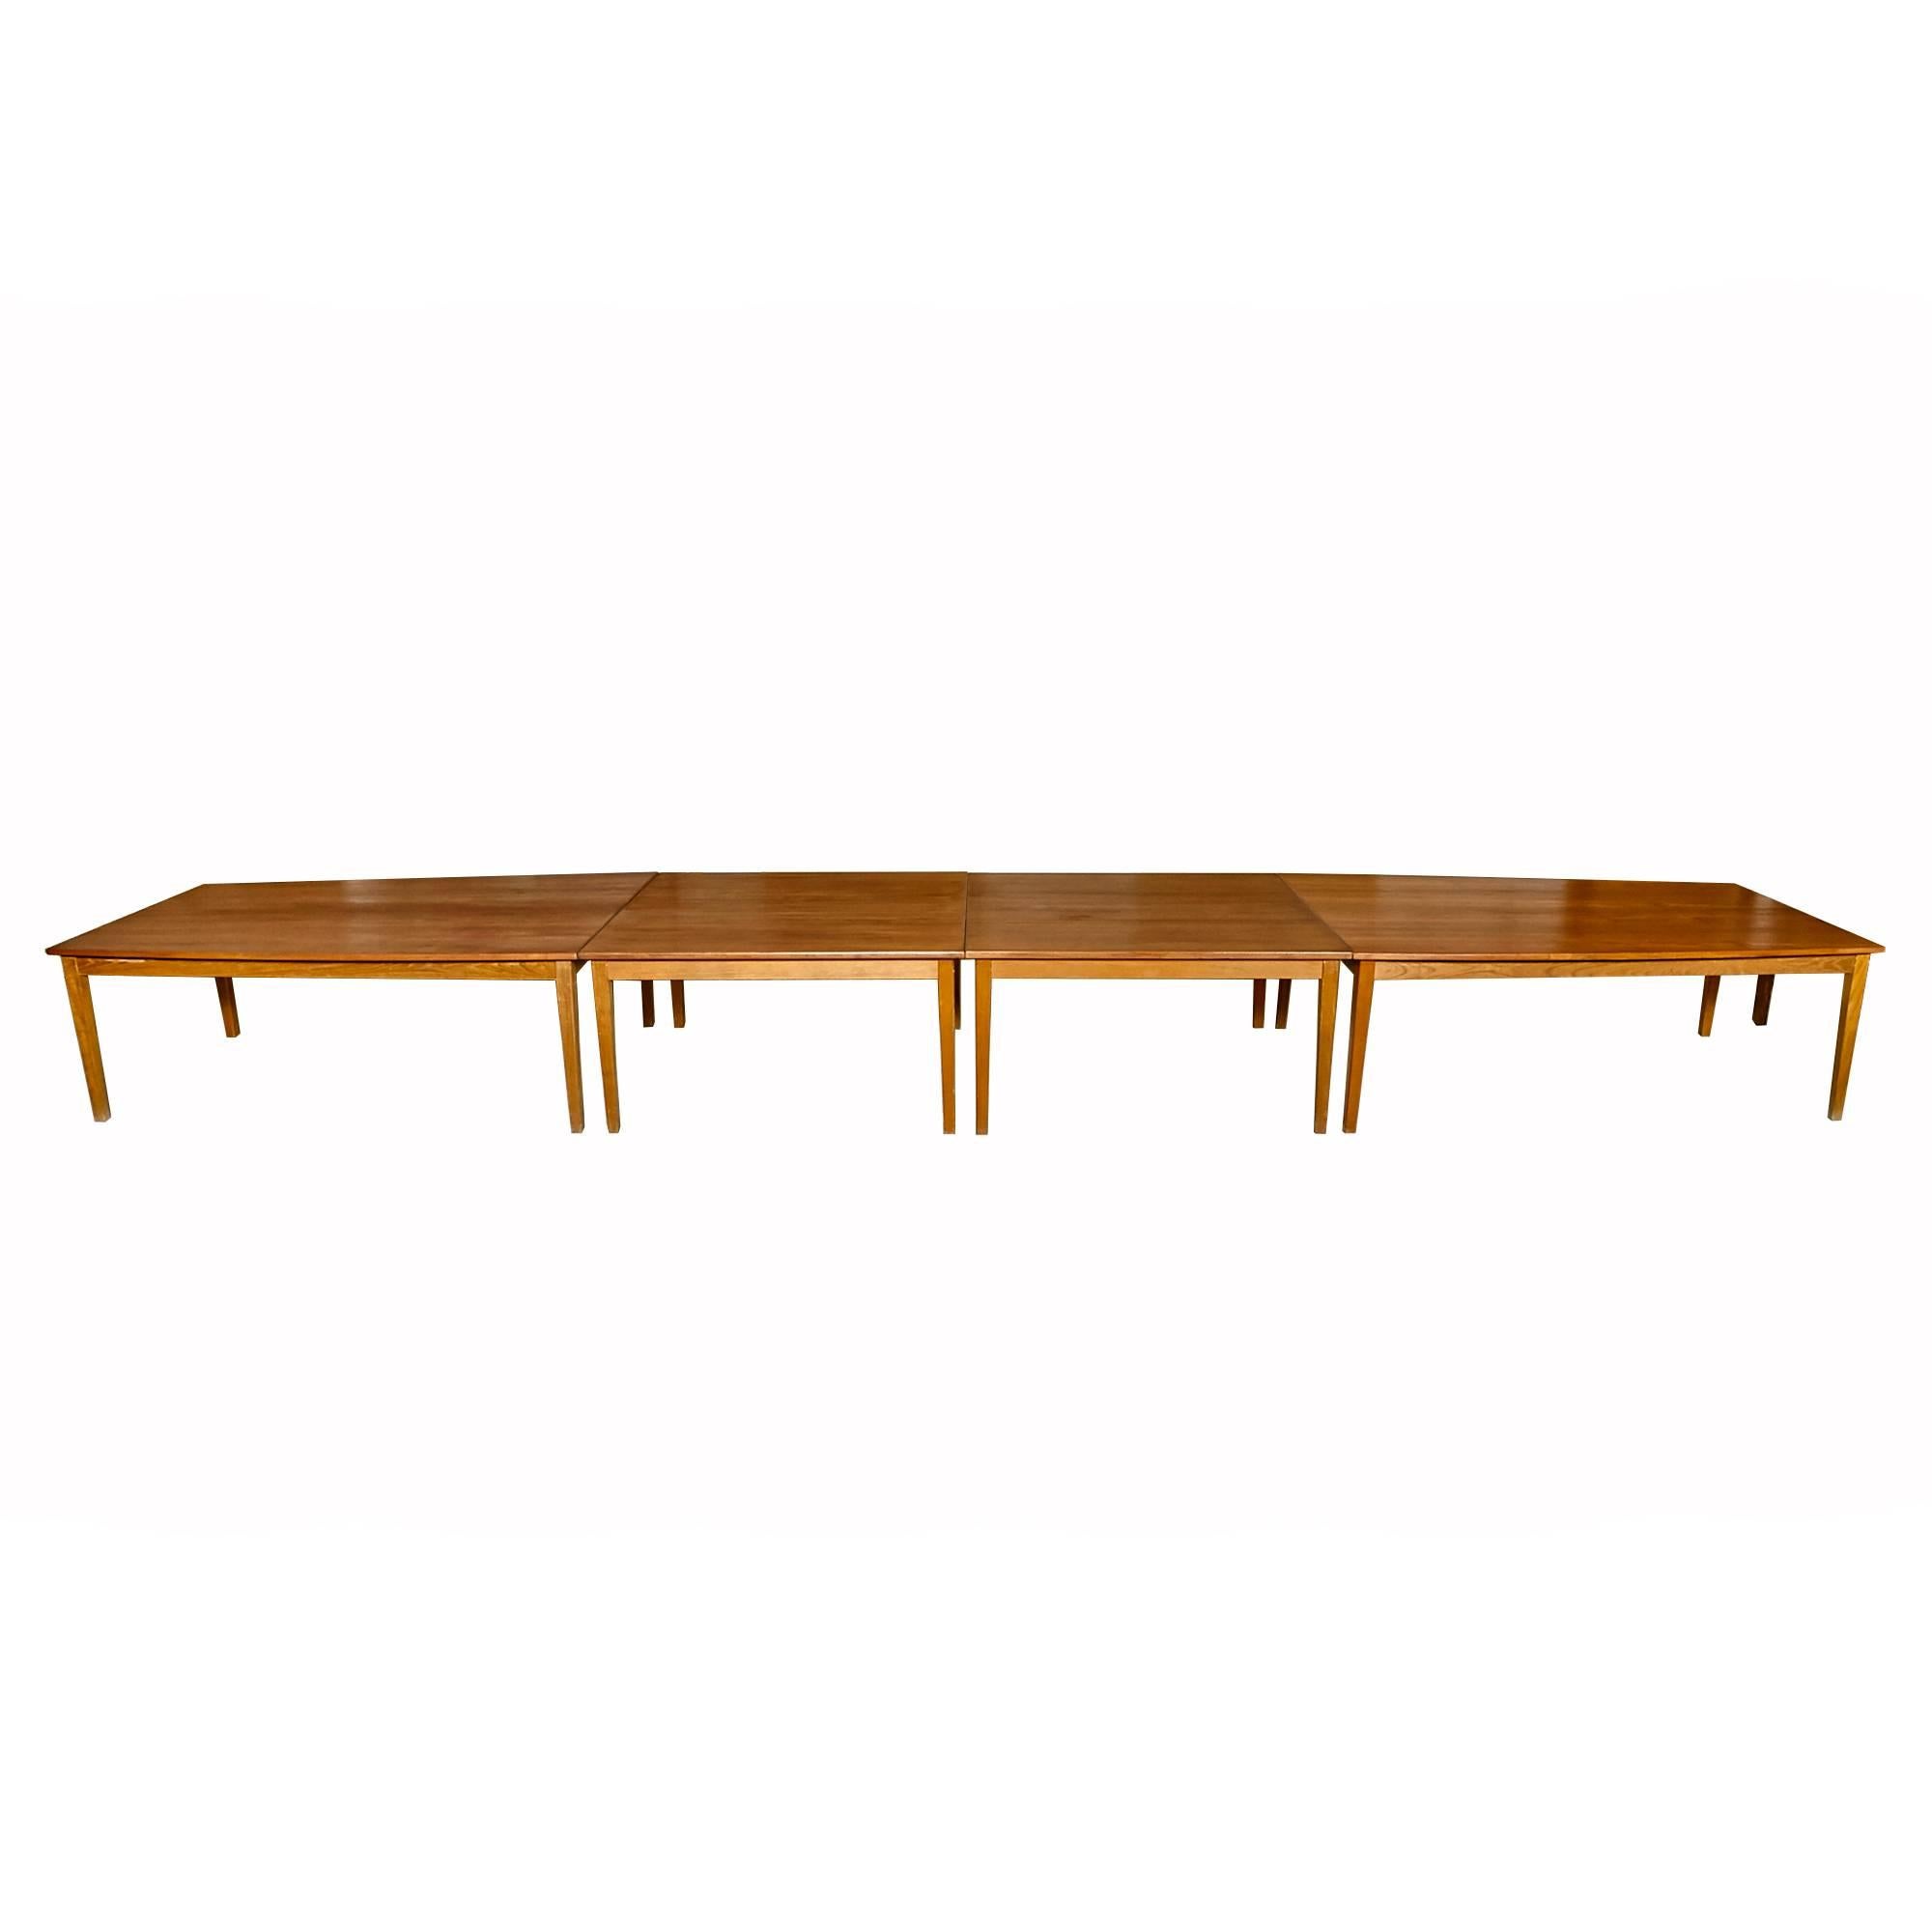 Vintage 1960s teak four section boat-style conference table from Denmark. The two end tables have a slight curve to the edges. The tables can be changed into several different configurations. The tables are not marked. Some light usage wear in